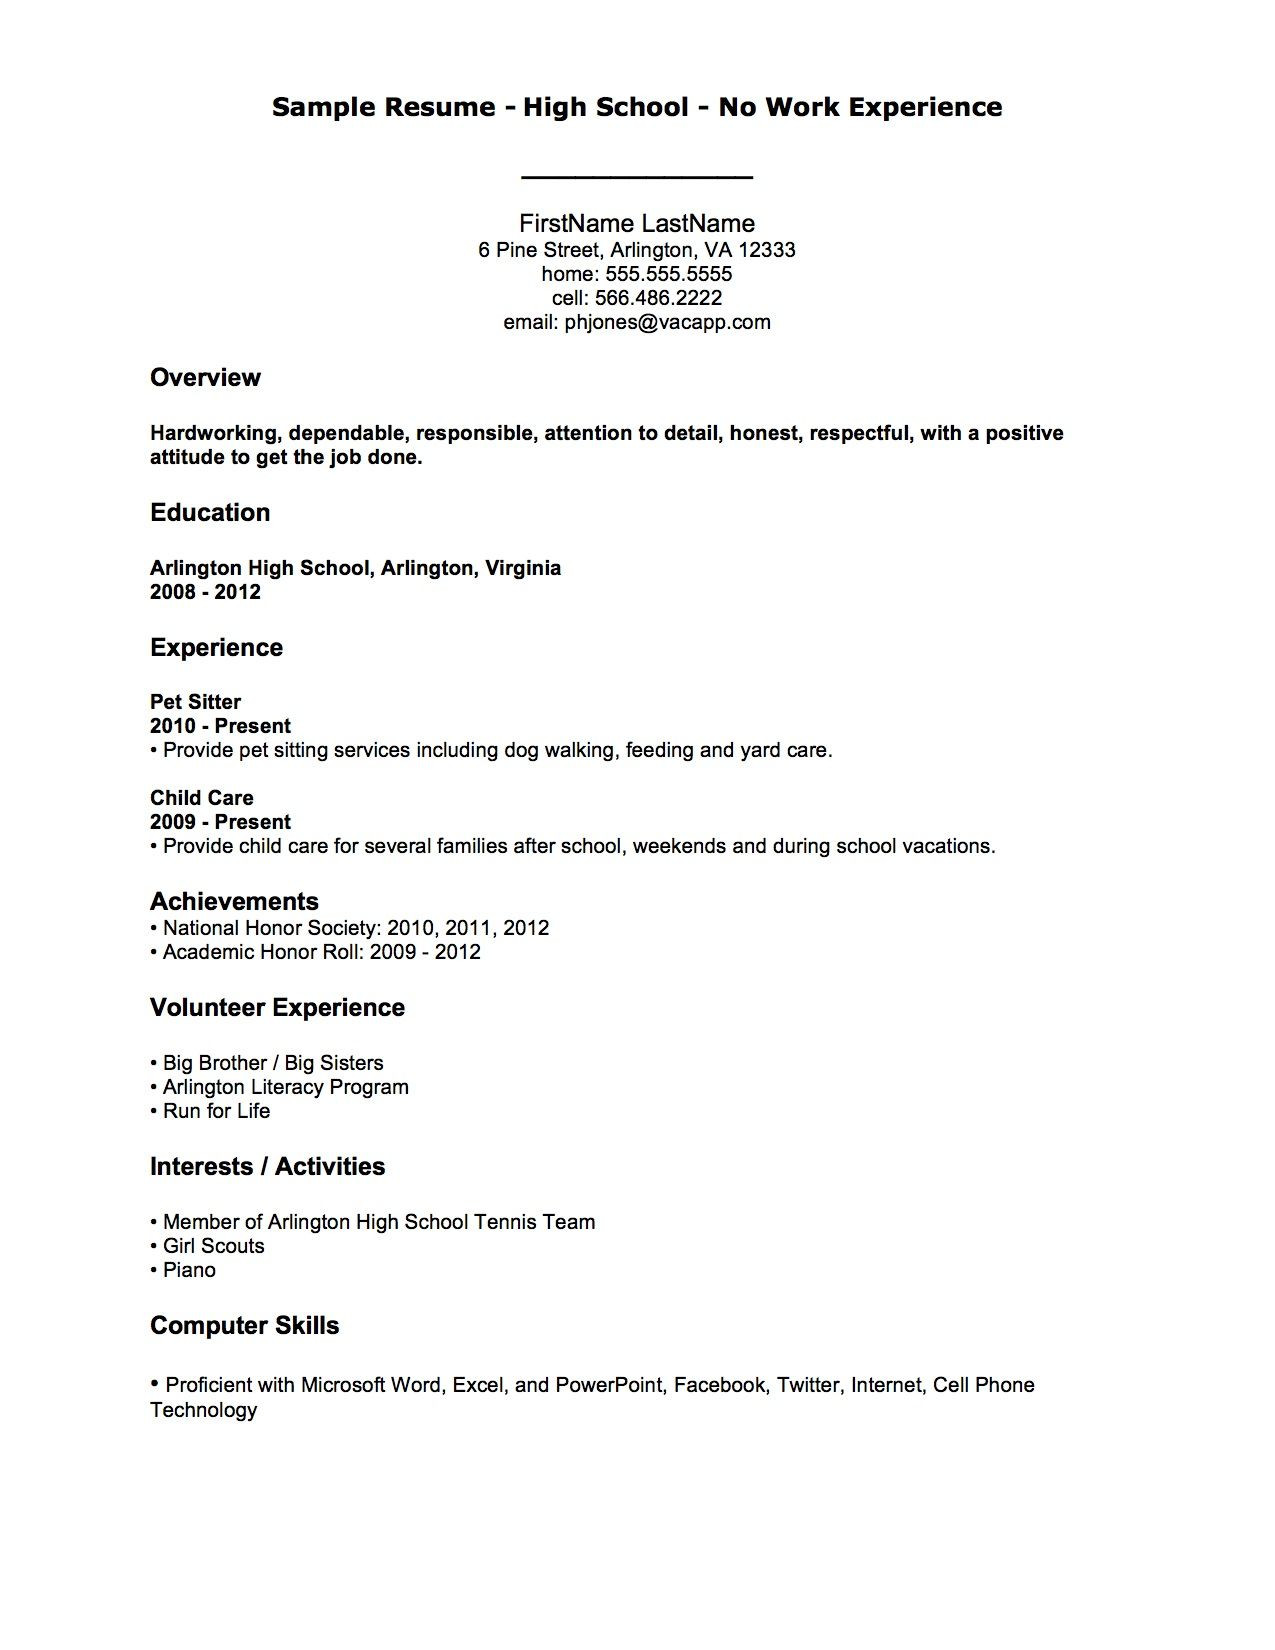 Resume Template for someone with Little Work Experience Resume Examples with No Job Experience , #examples #experience …